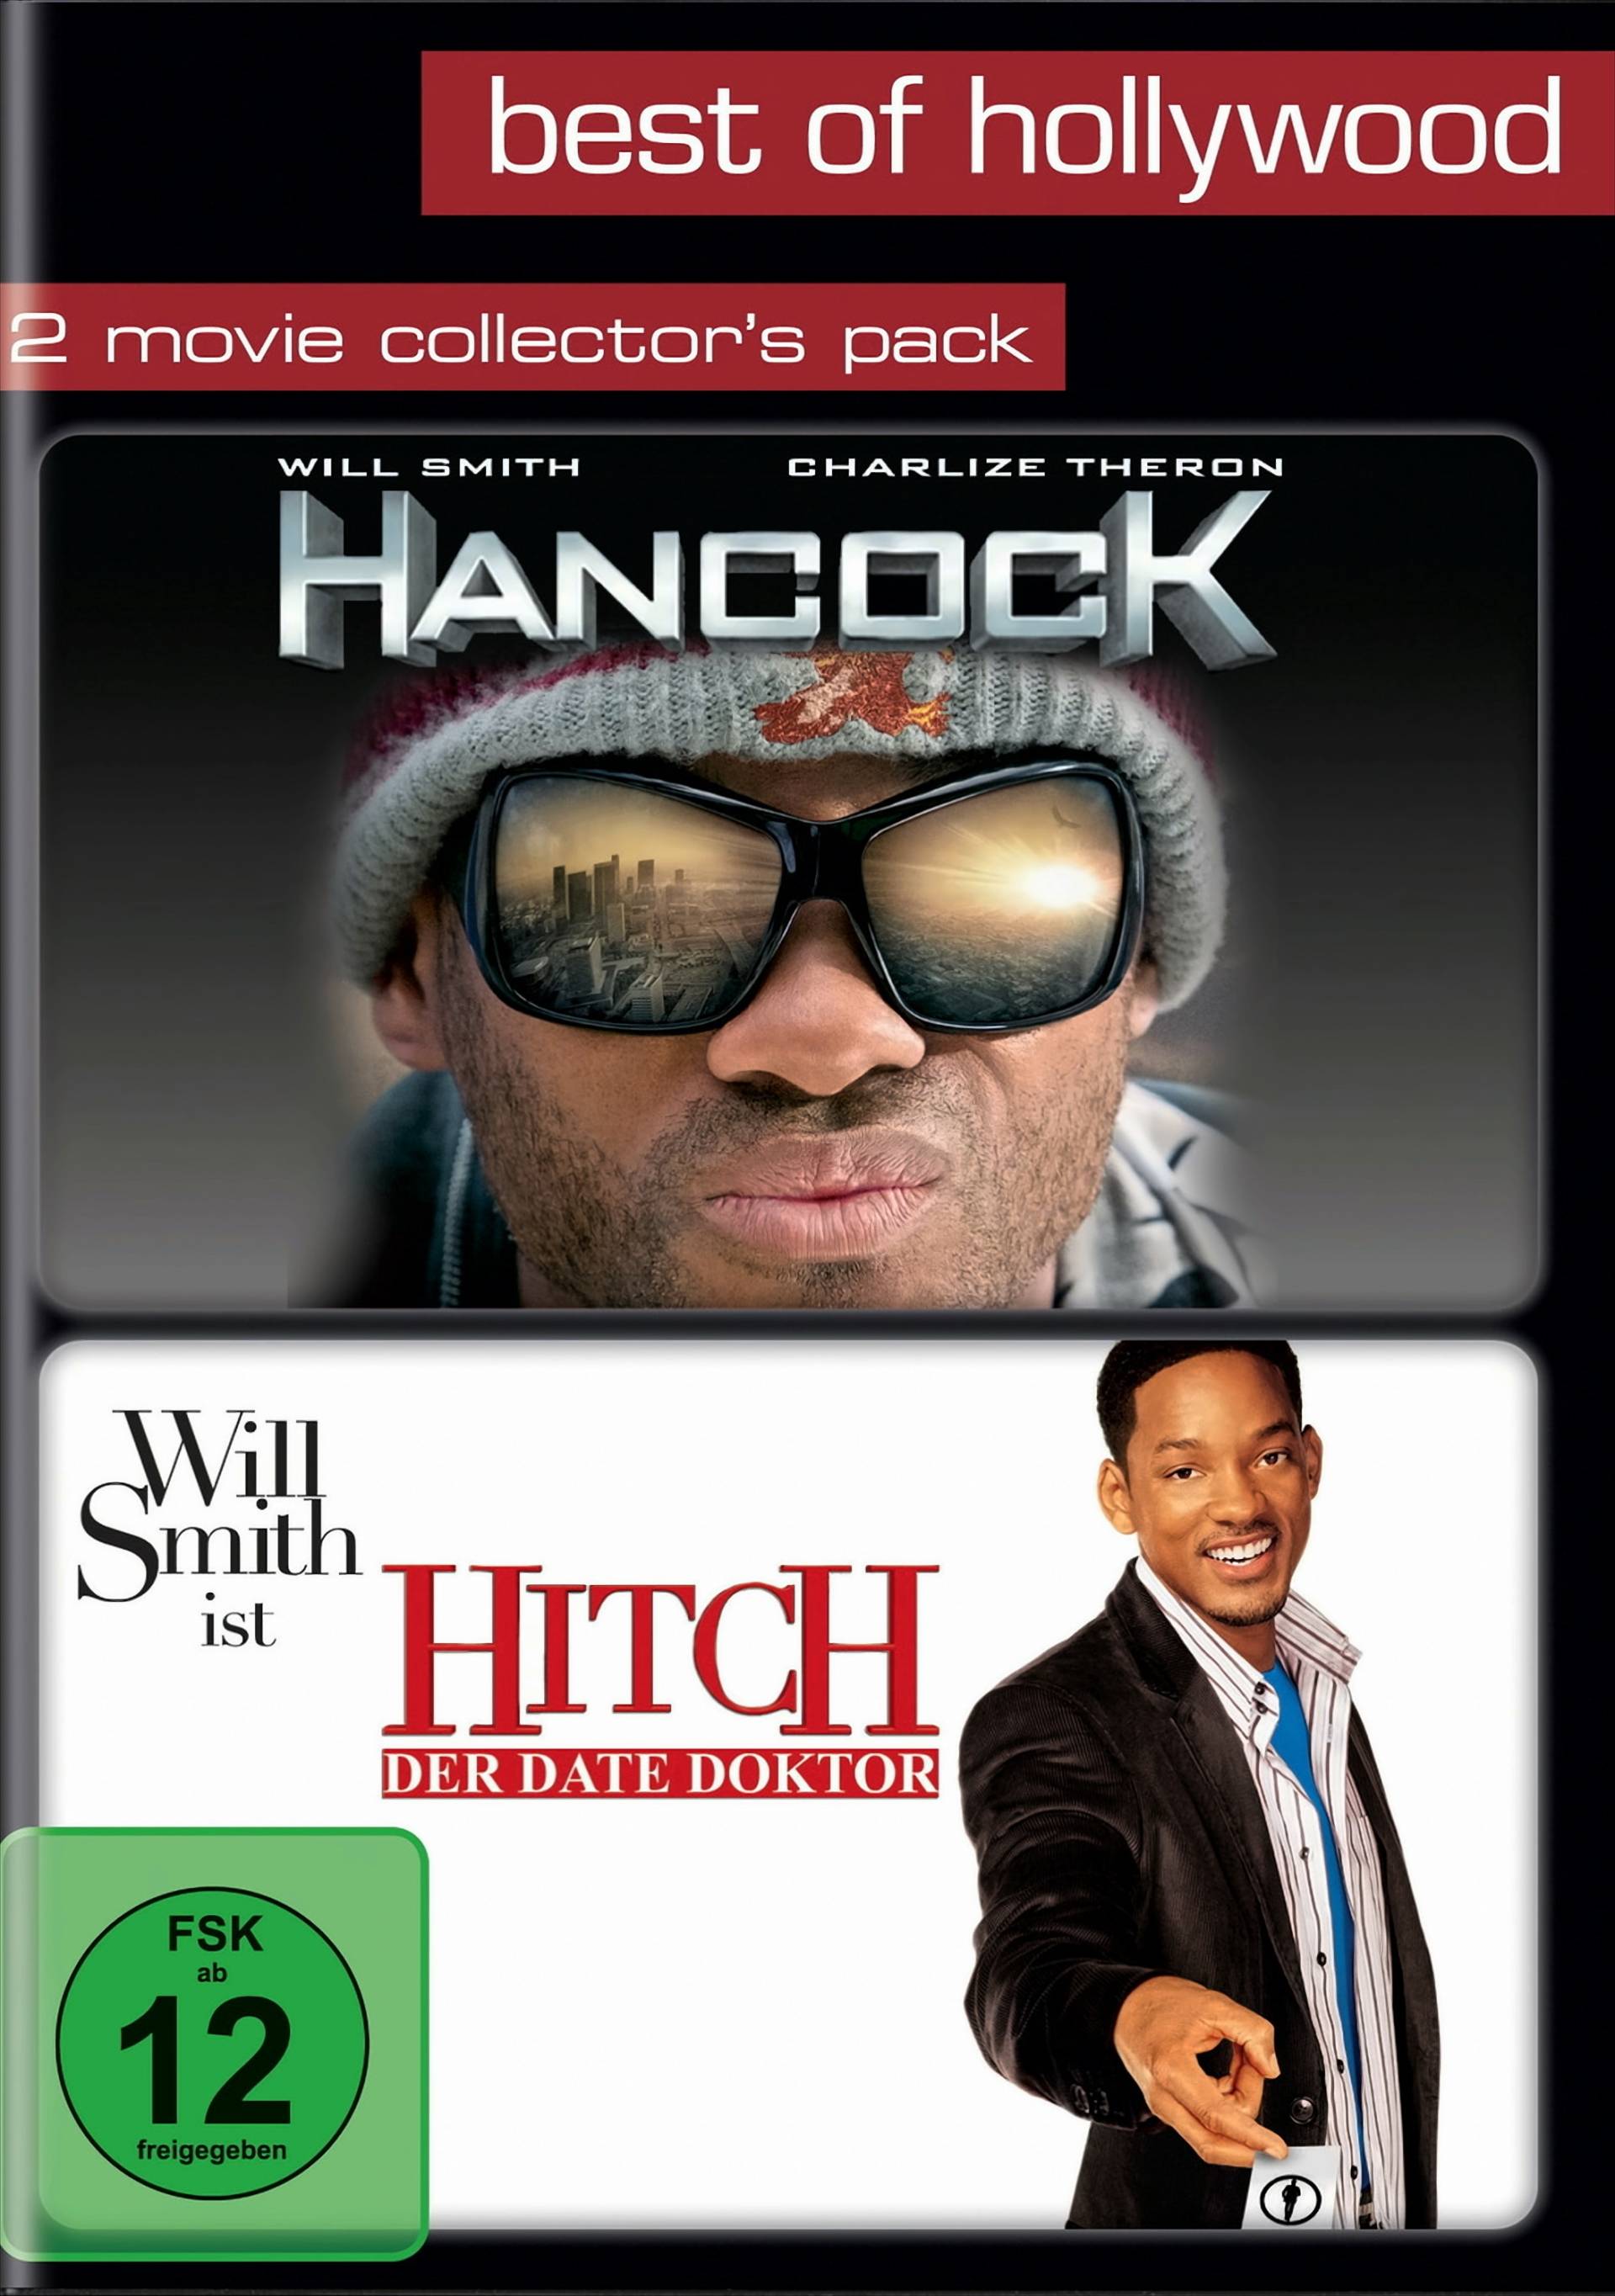 Best of Hollywood - 2 Movie Collector's Pack: Hancock / Hitch - Der Date Doktor (2 Discs) von Sony Pictures